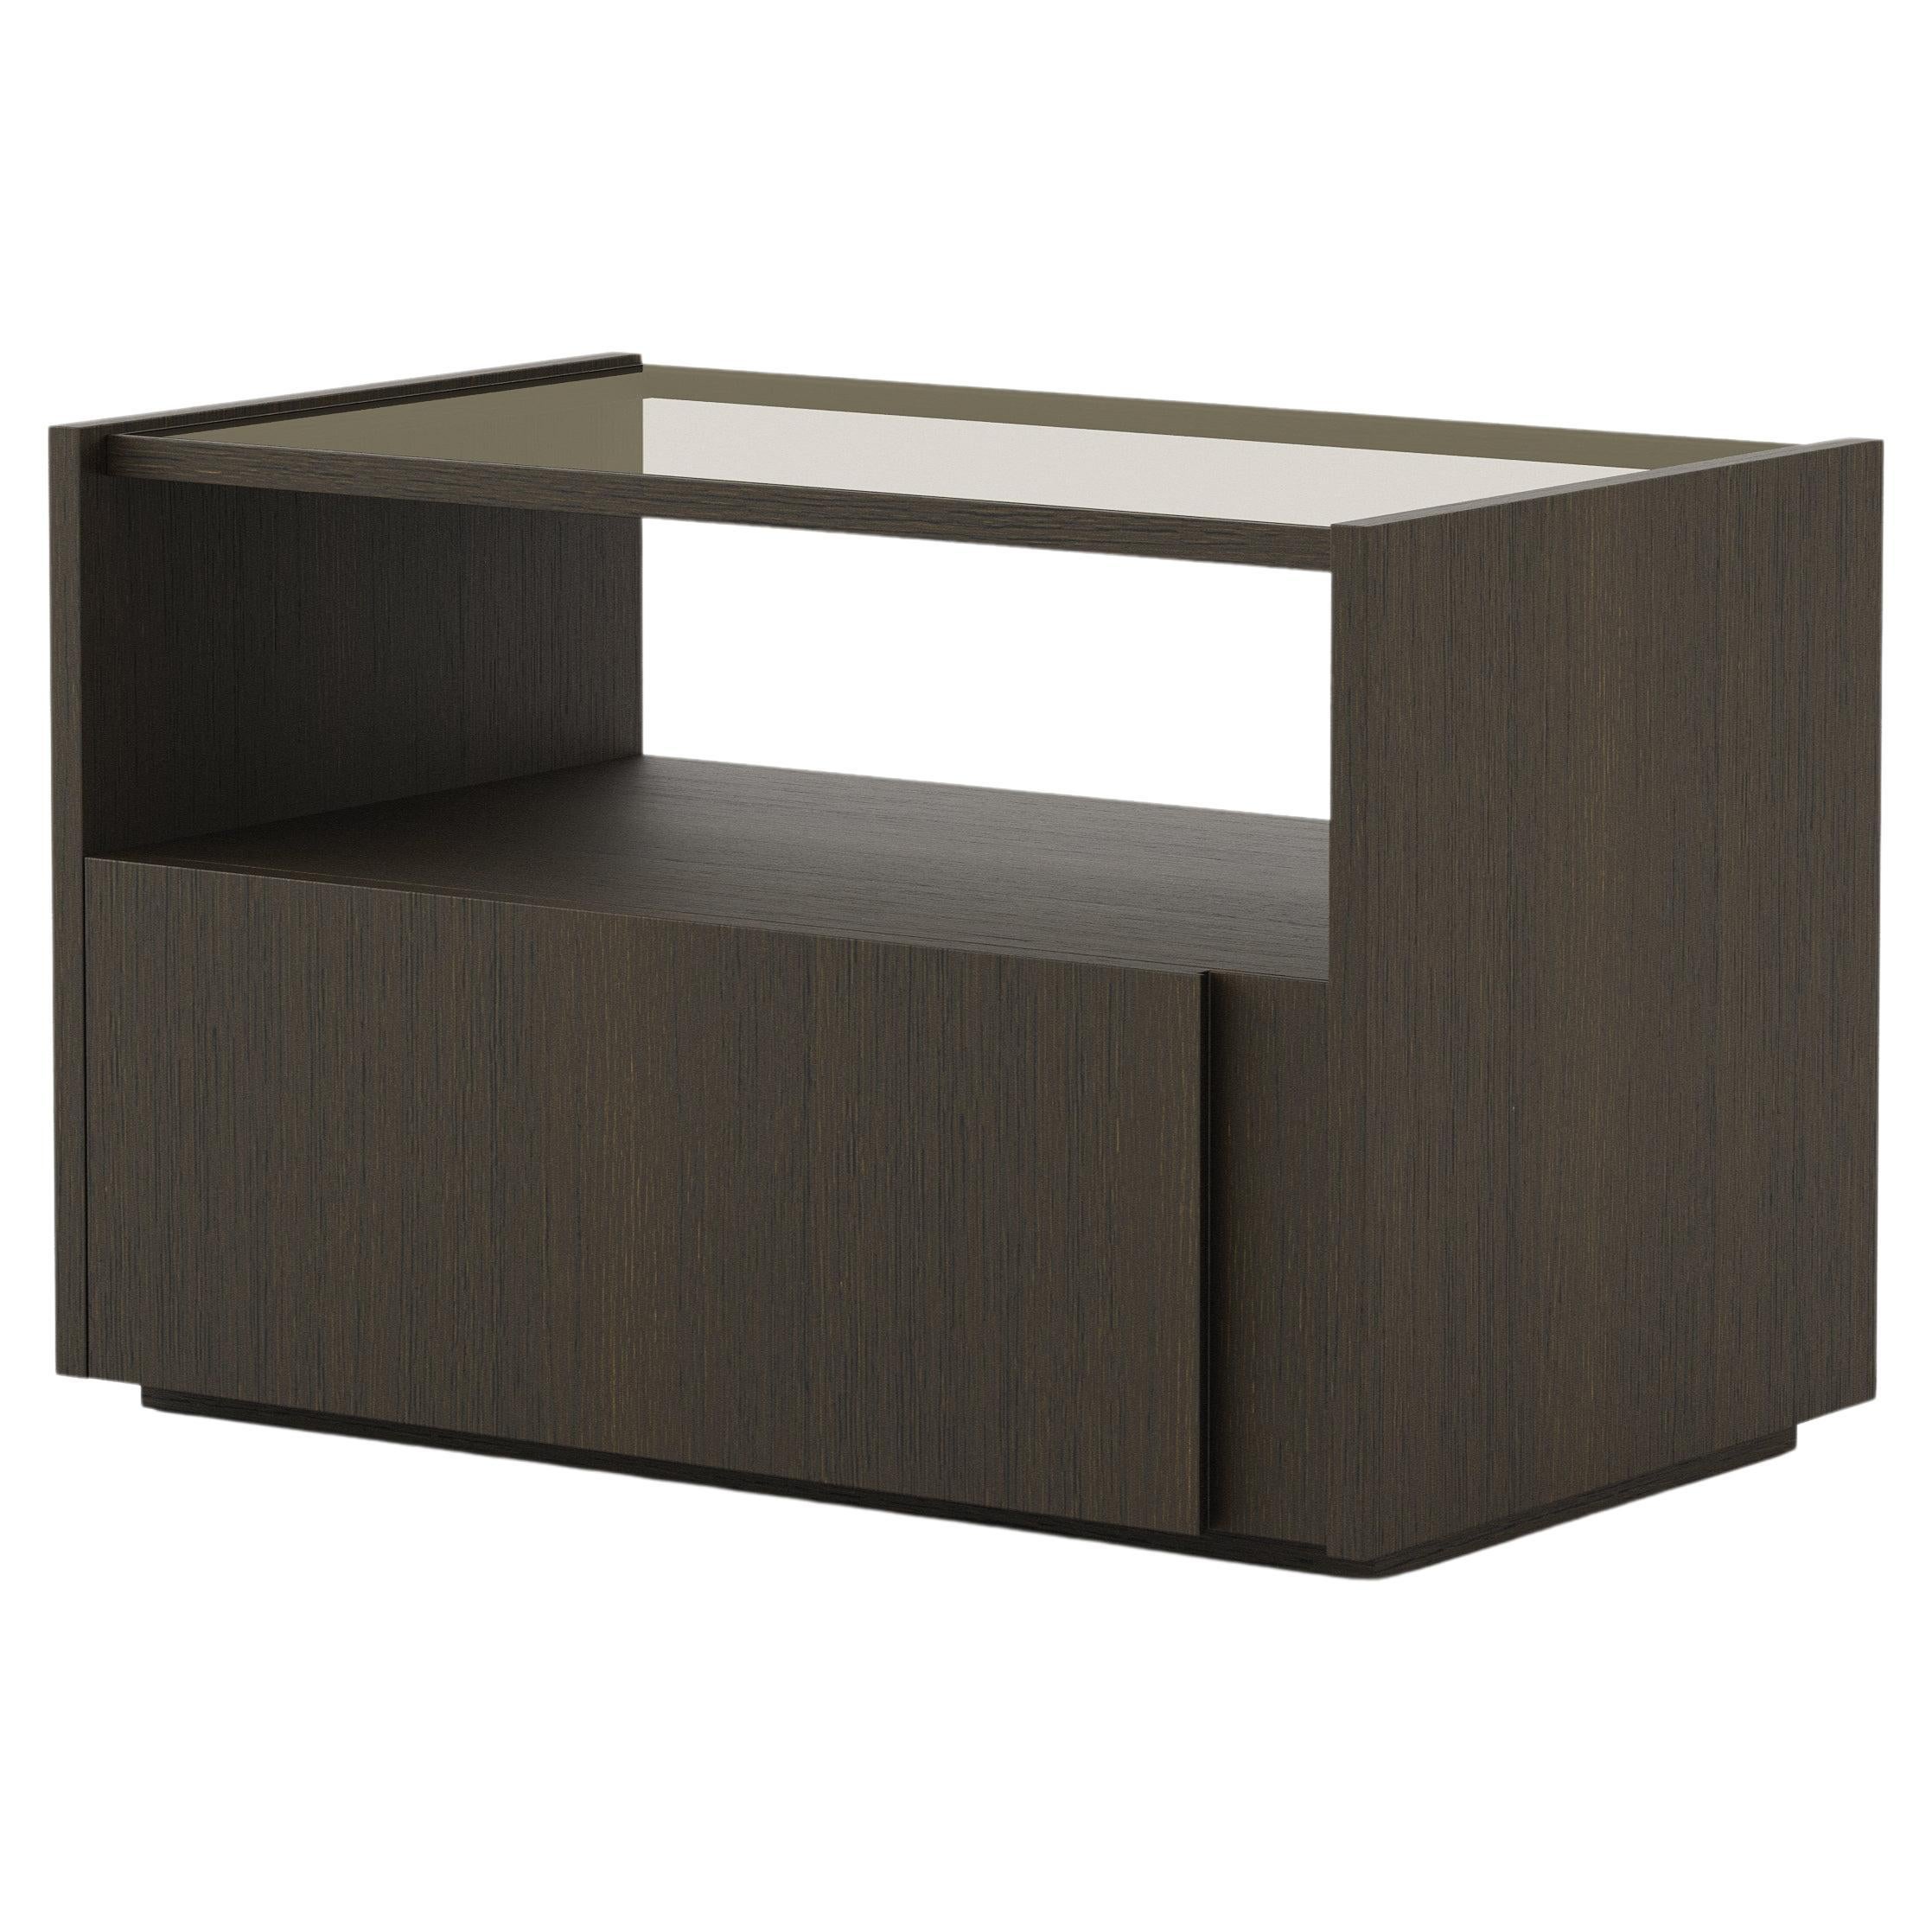 Modern Sevilha Nightstand Made with Walnut and Glass, Handmade by Stylish Club For Sale